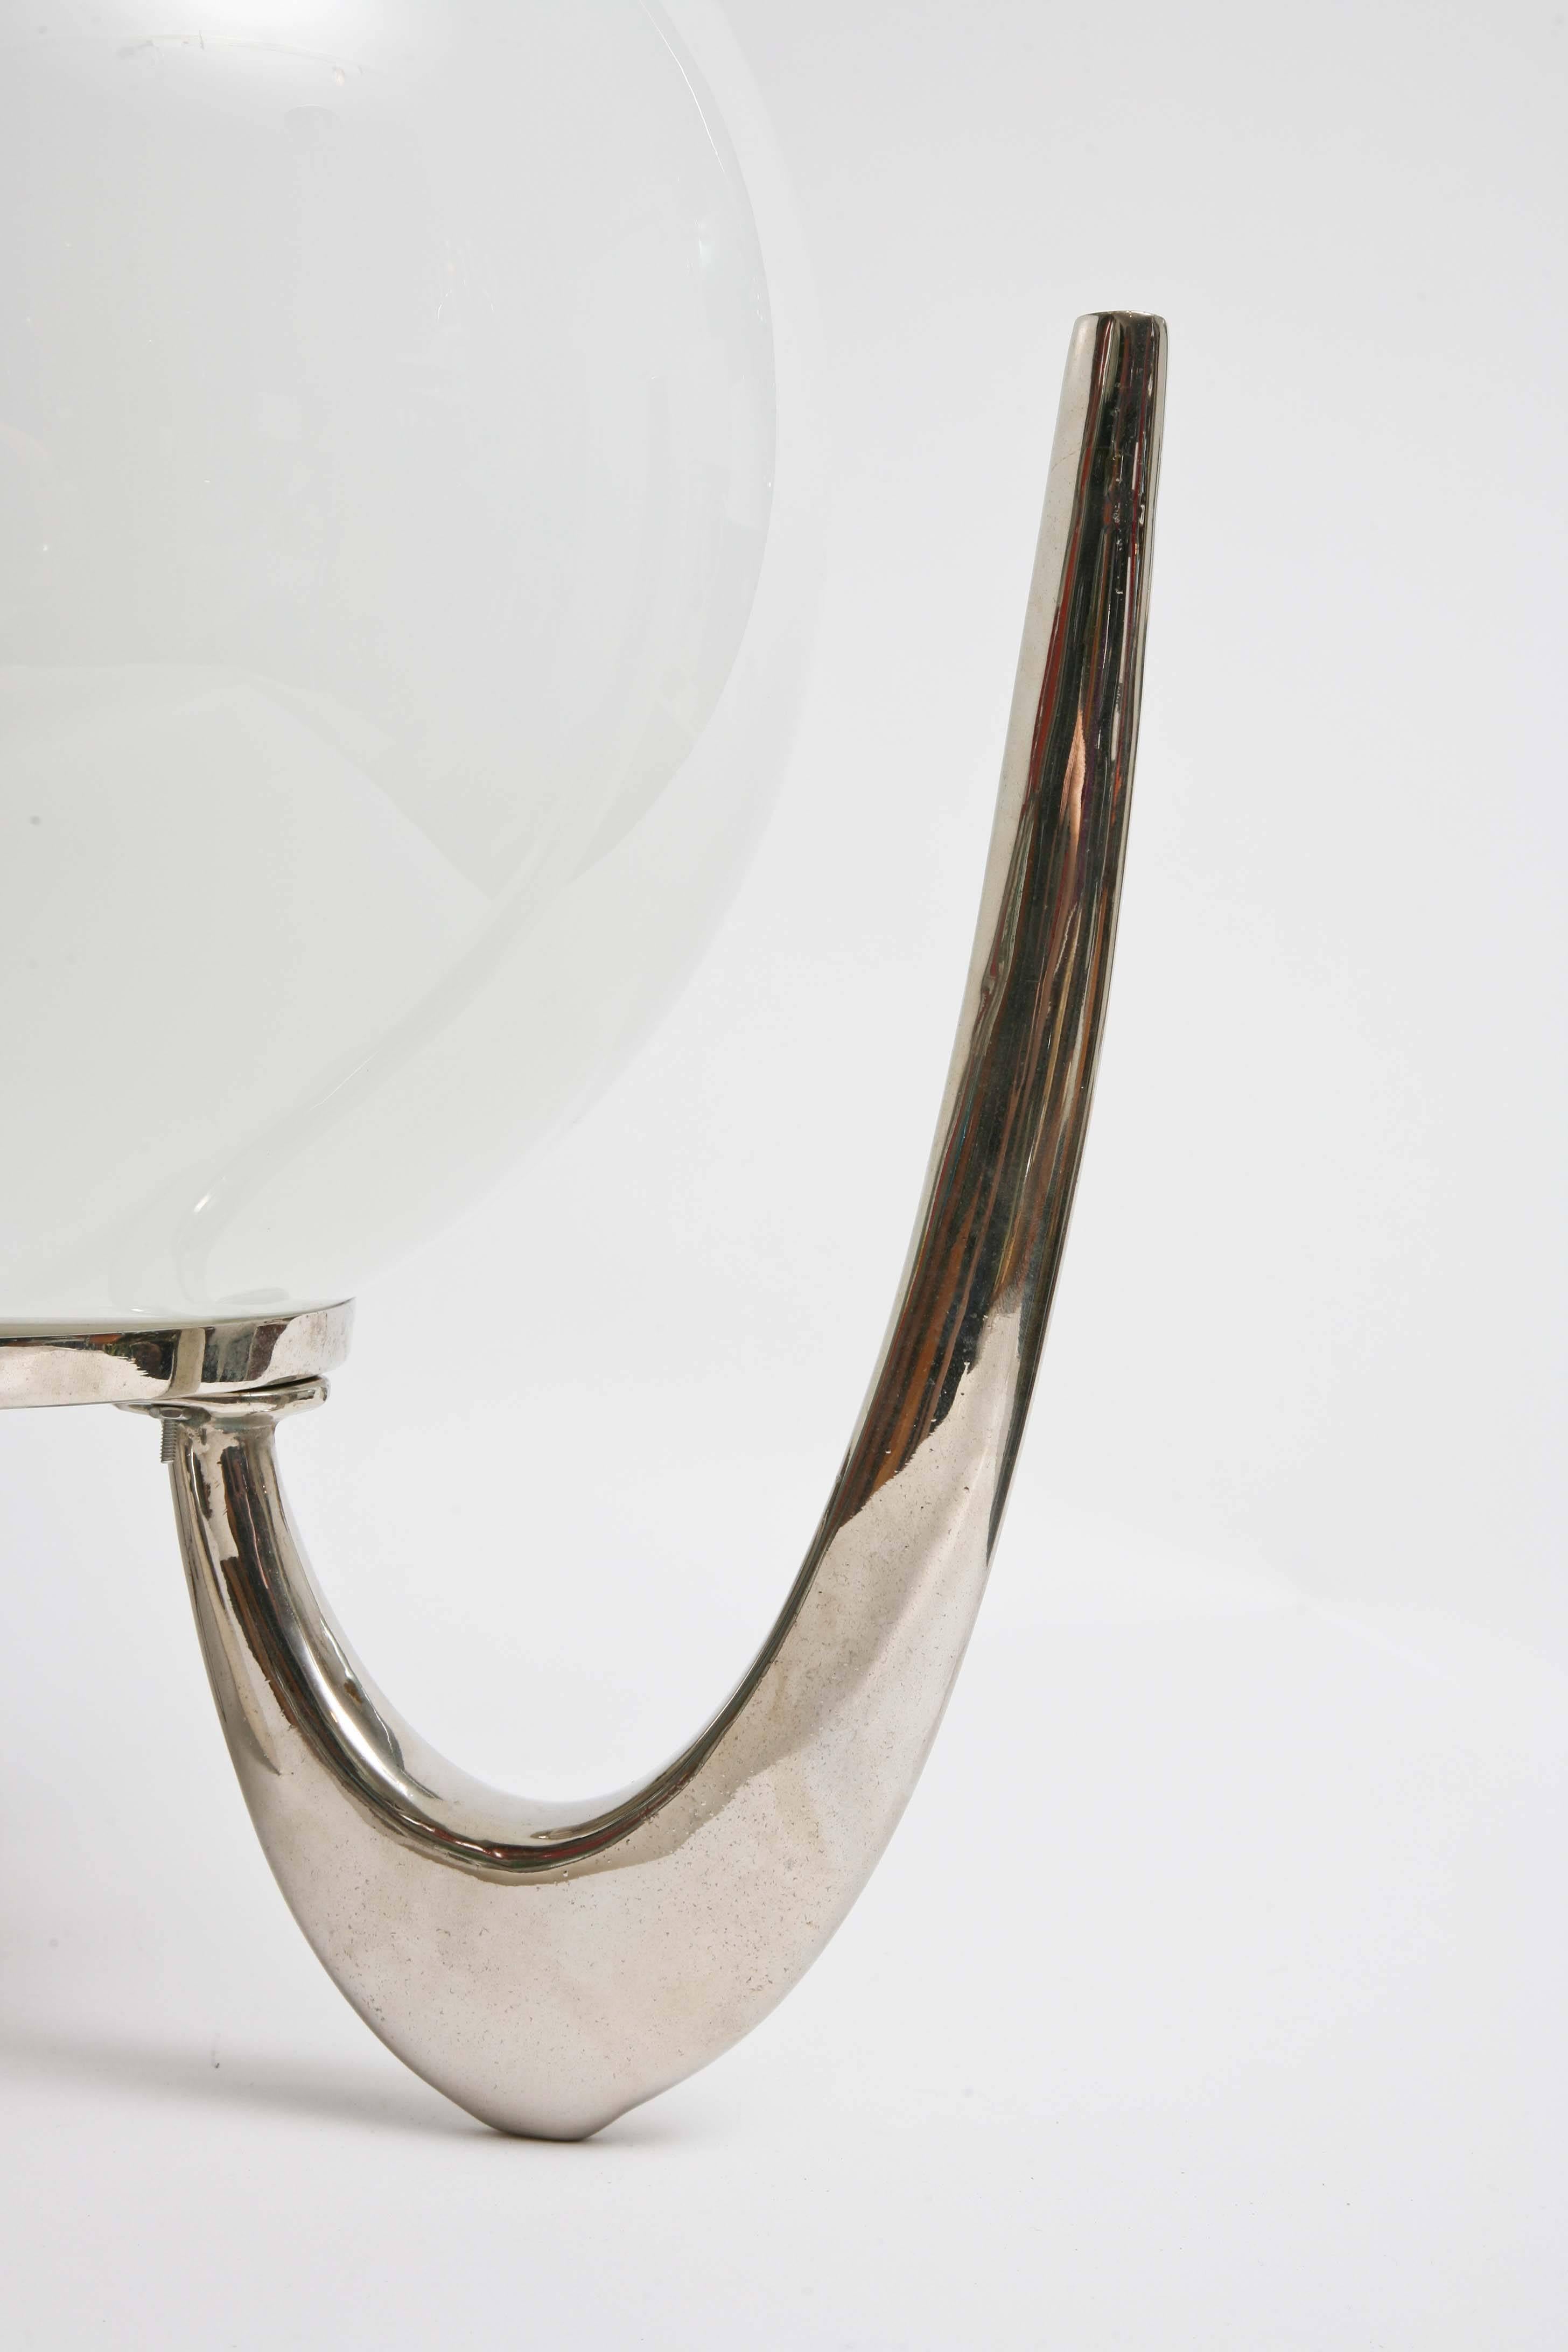 20th Century Mid-Century Modern Continental Chrome/Glass Sculptural Table/Floor Orb Lamp For Sale